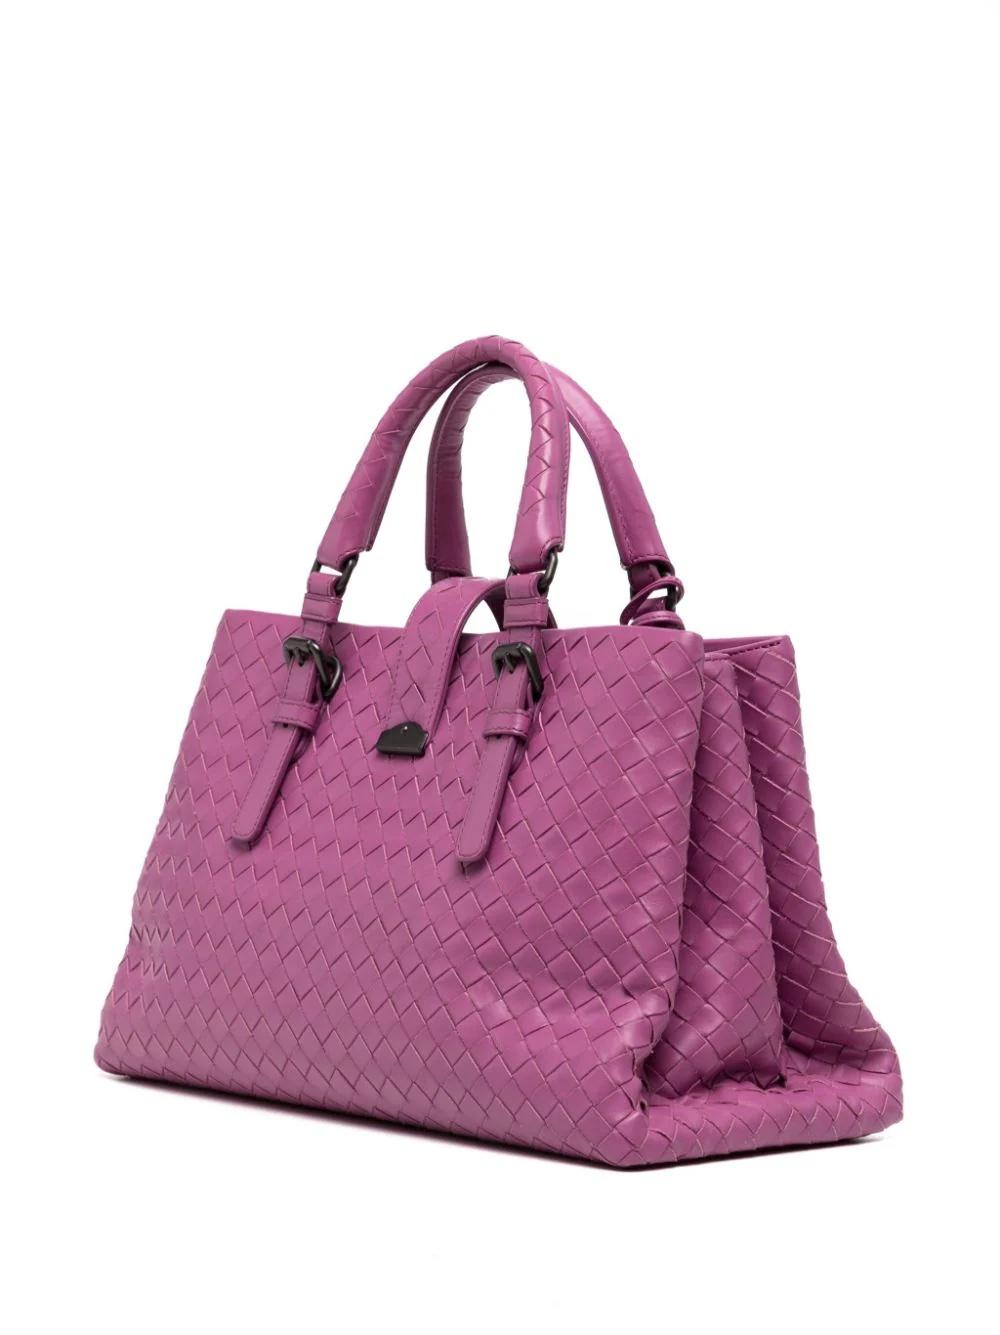 * magenta
* leather
* signature Intrecciato design
* leather tag
* strap closure and push-lock fastening
* two rolled top handles
* gunmetal-tone hardware
* rectangle body
* Excellent Condition: No major signs of wear.


Please note that most of the